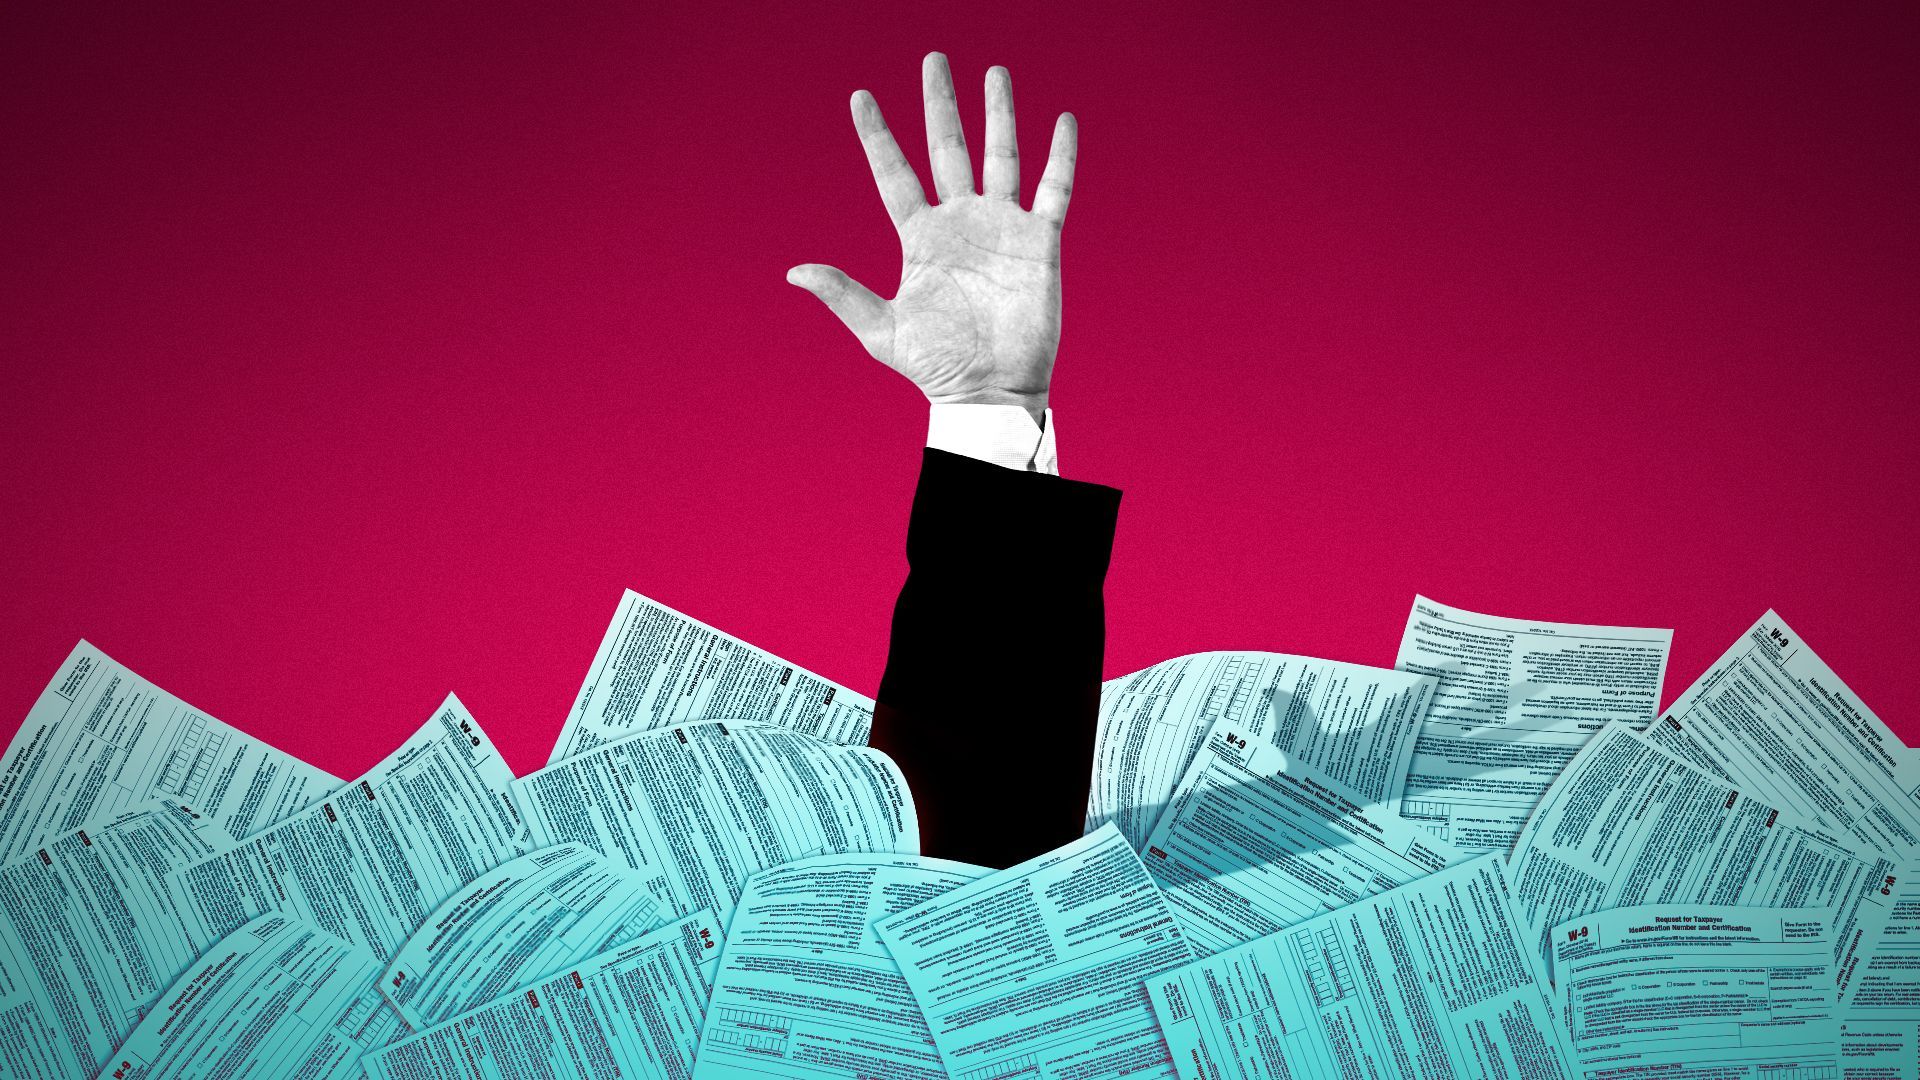 Illustration of a hand reaching out of a pile of paper tax forms.